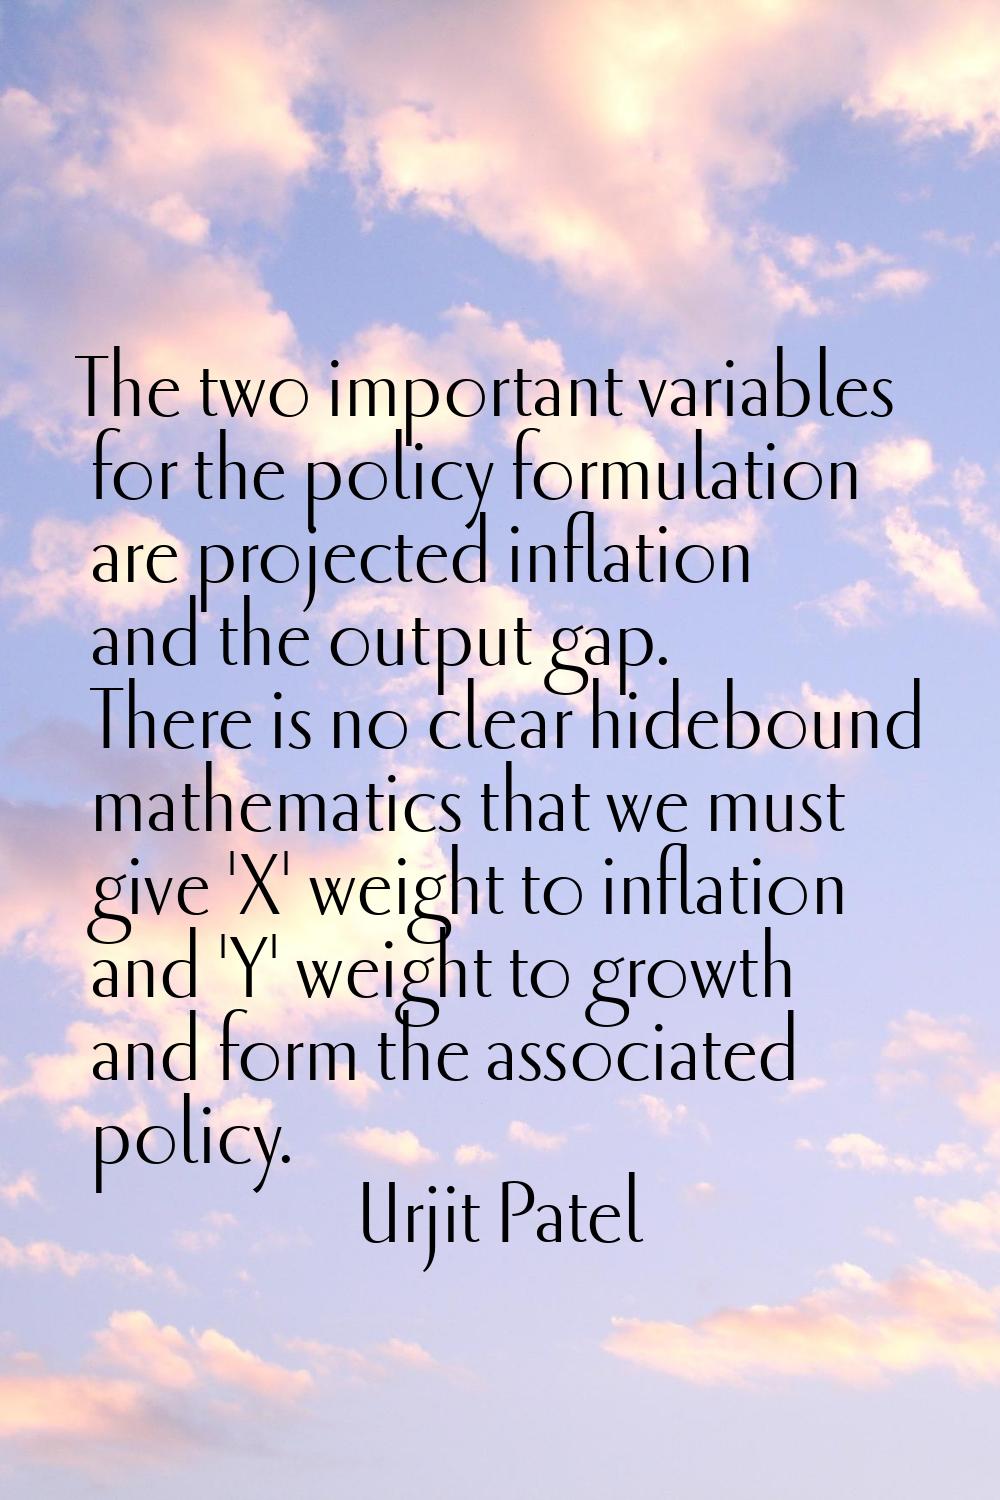 The two important variables for the policy formulation are projected inflation and the output gap. 